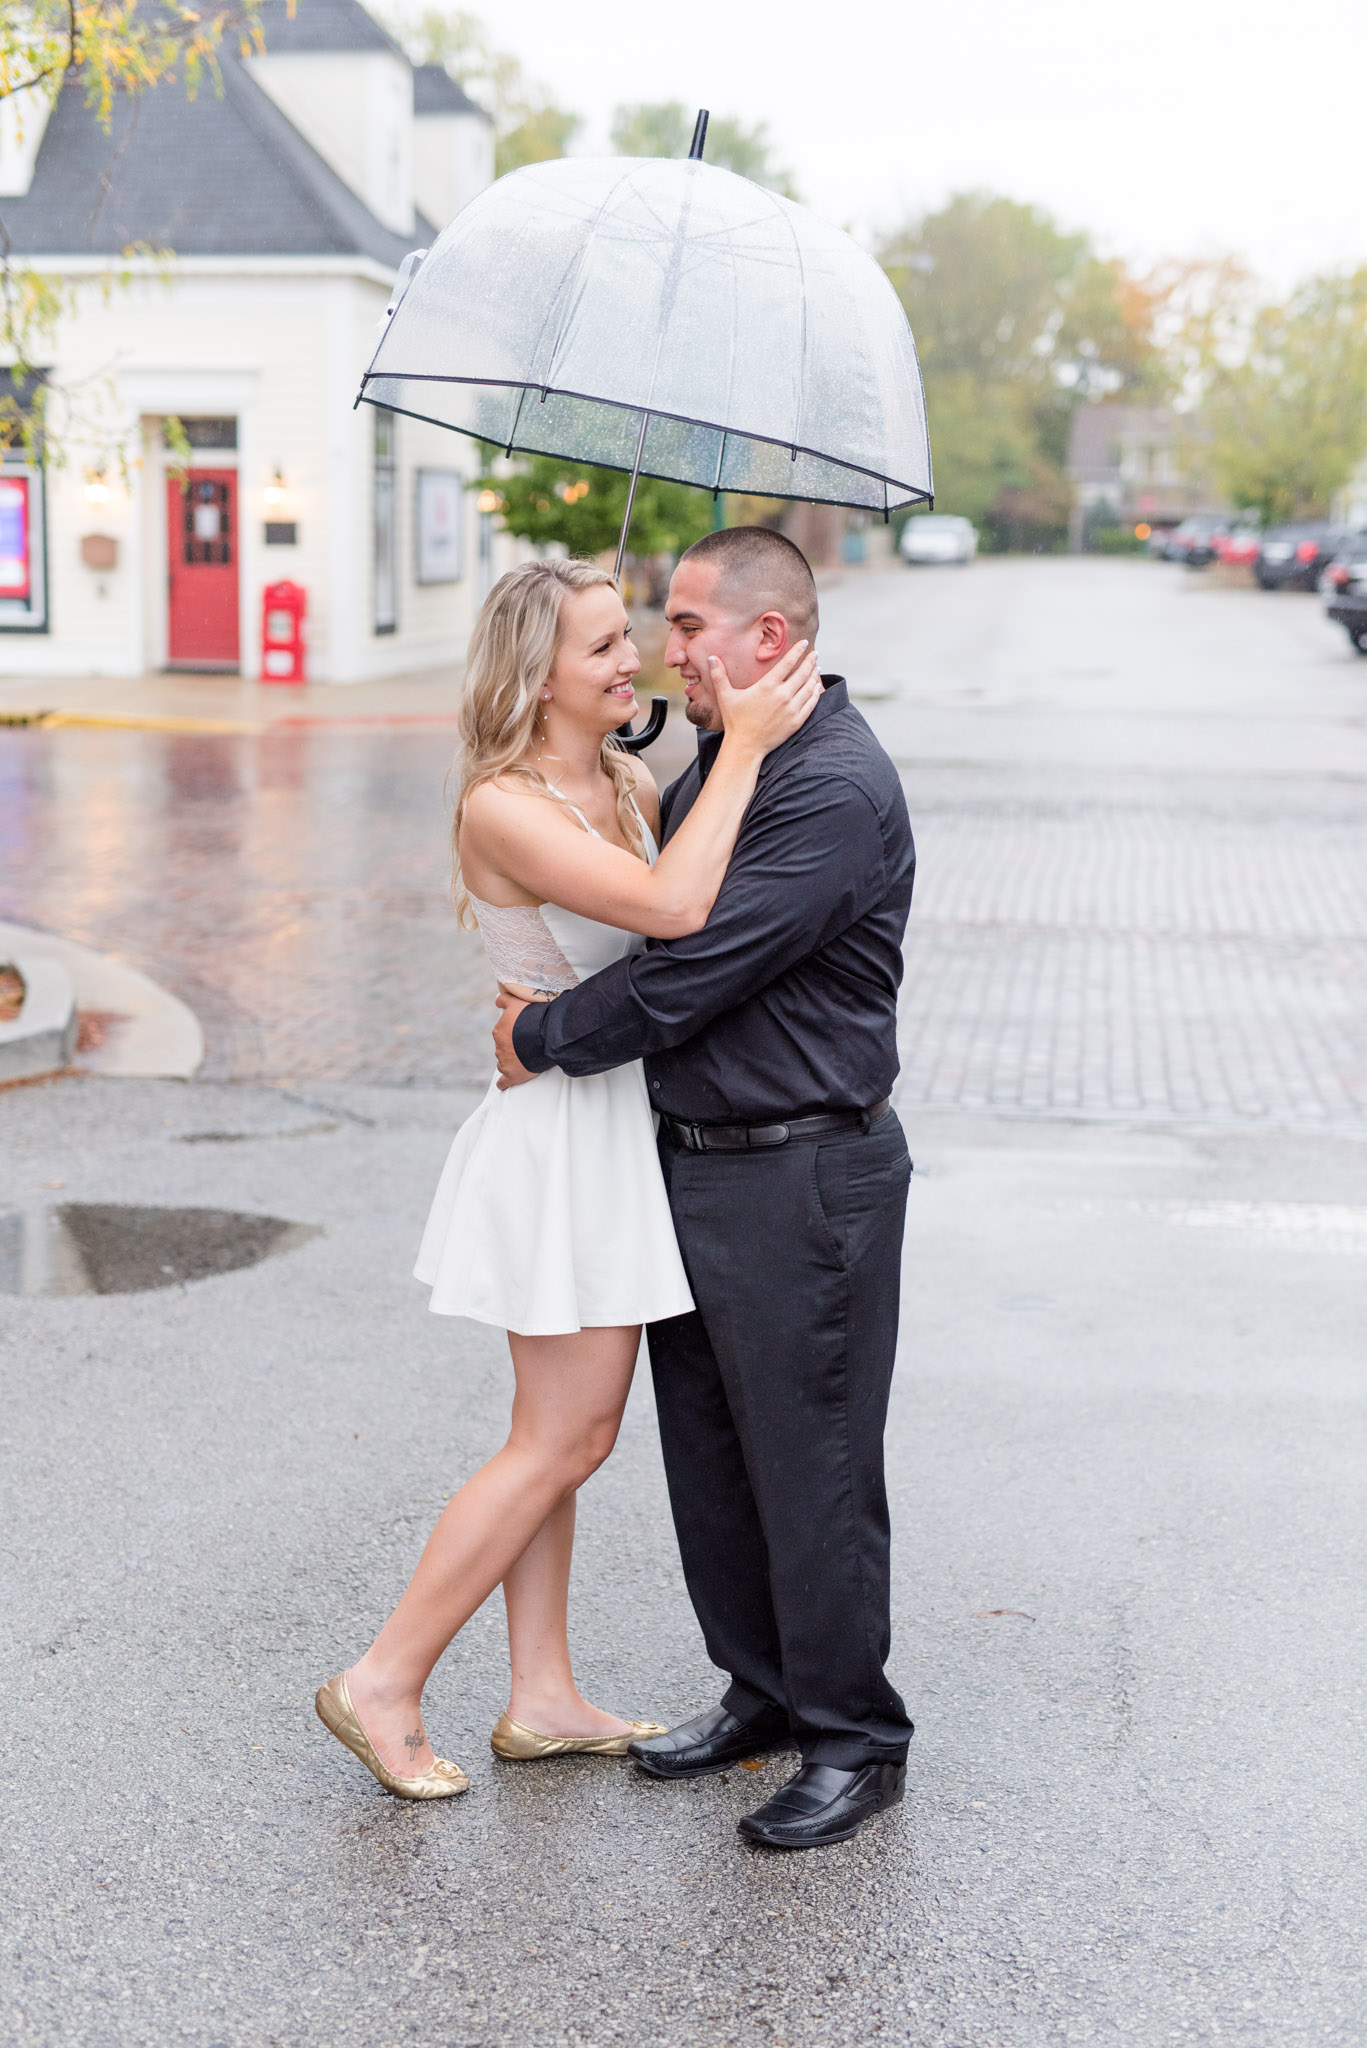 Engaged couple smiles under umbrella in downtown.